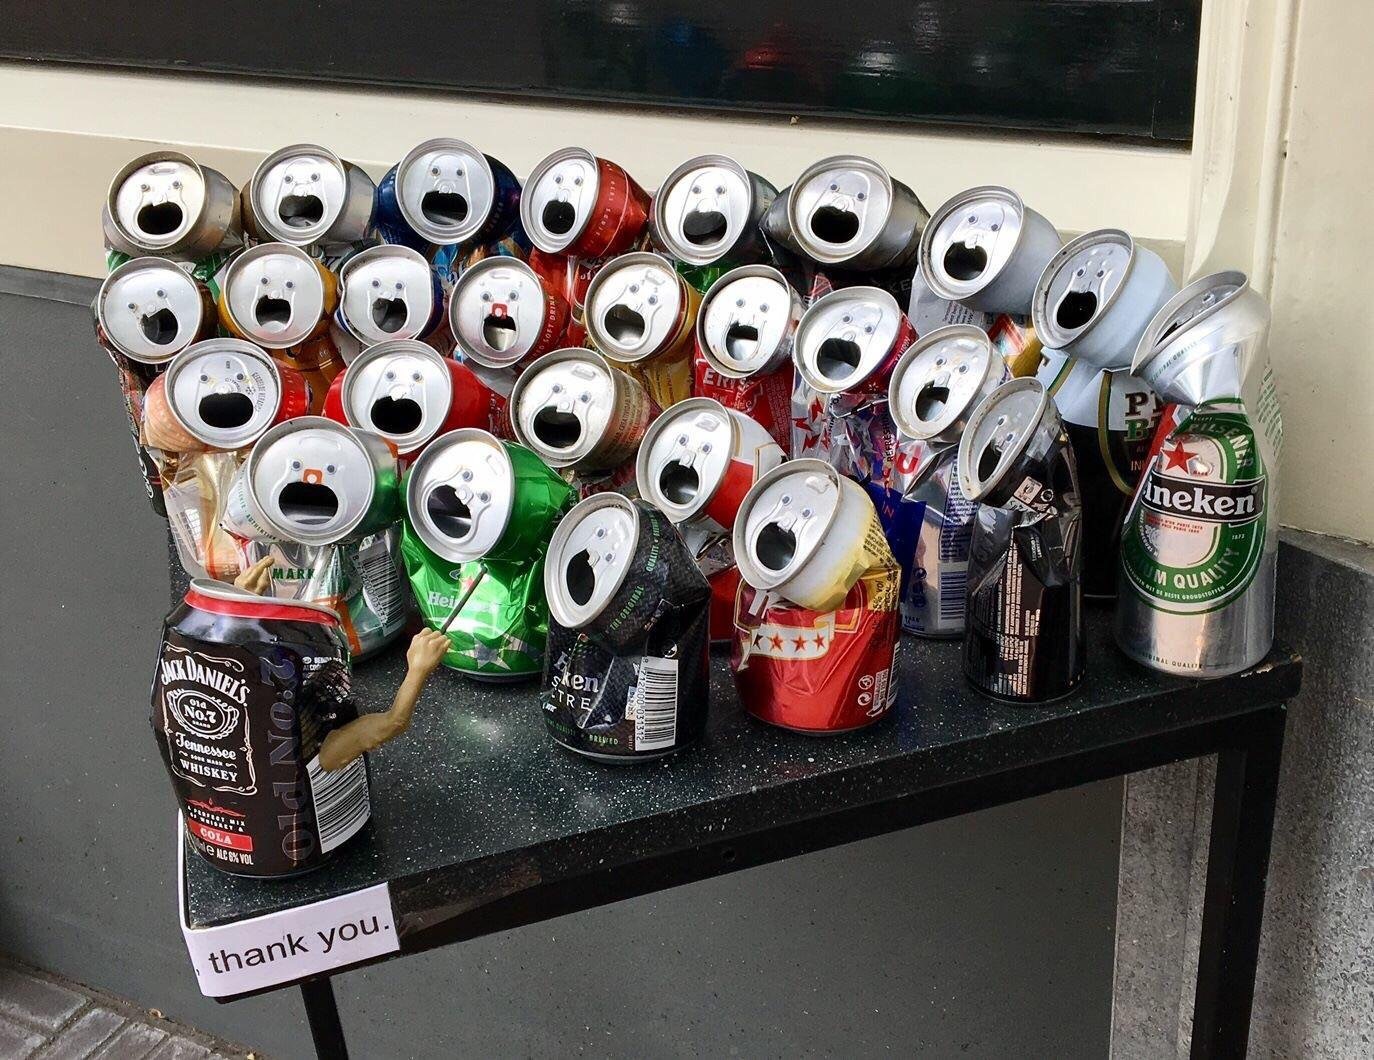 Cans crushed slightly and arranged to looks like a class being taught.